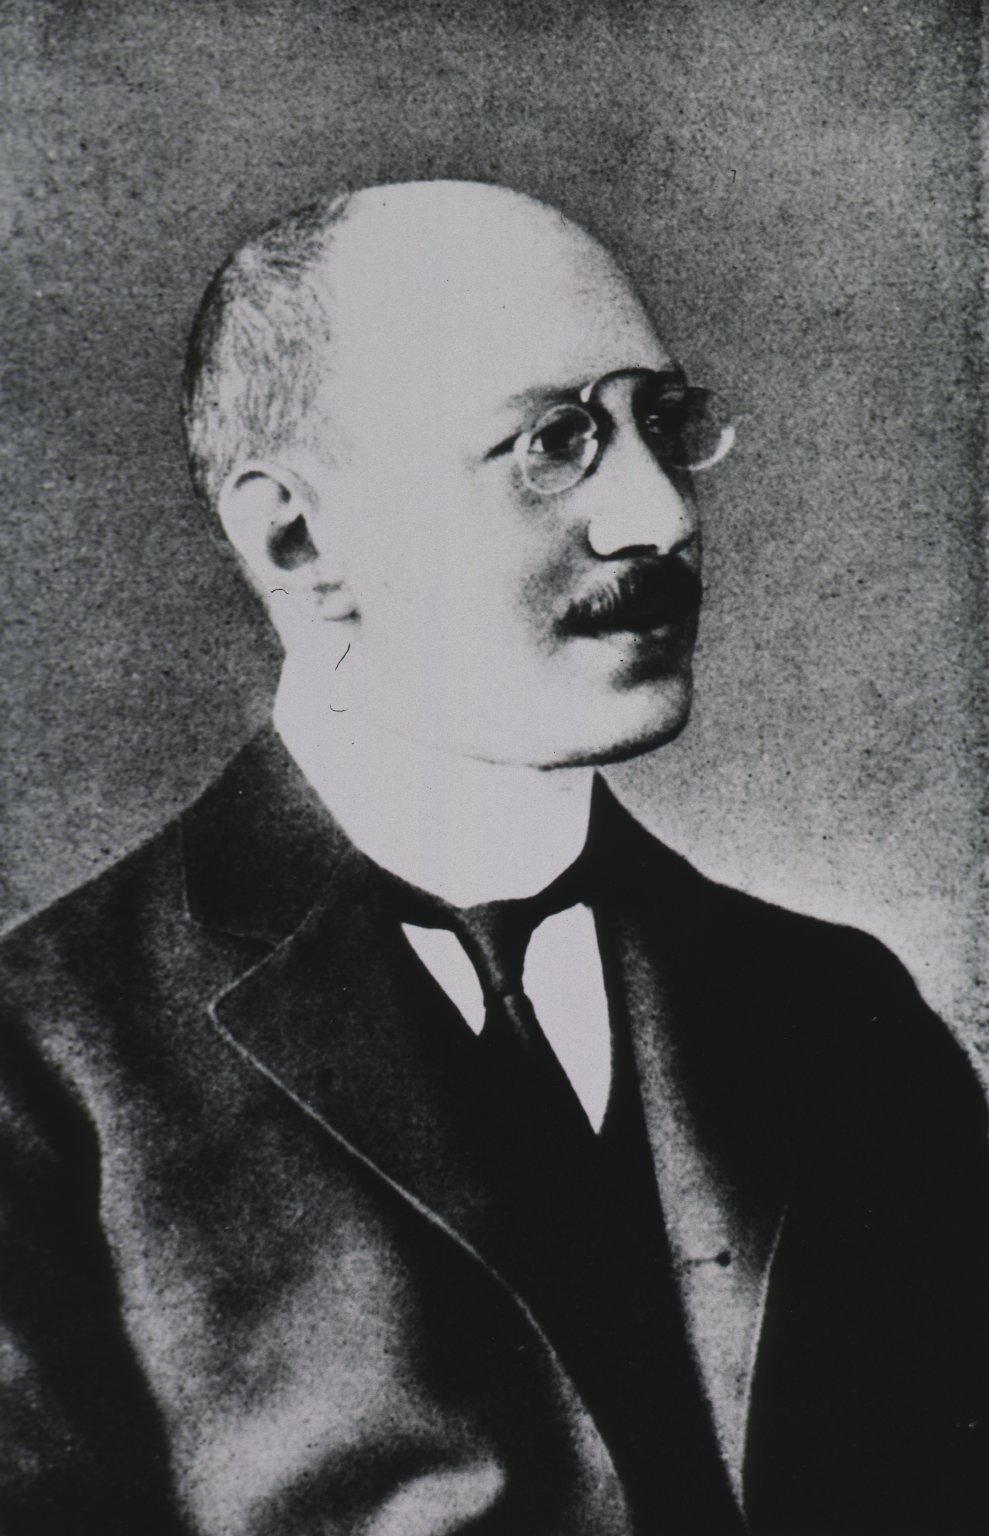 Old photograph of a man in a suit with glasses.